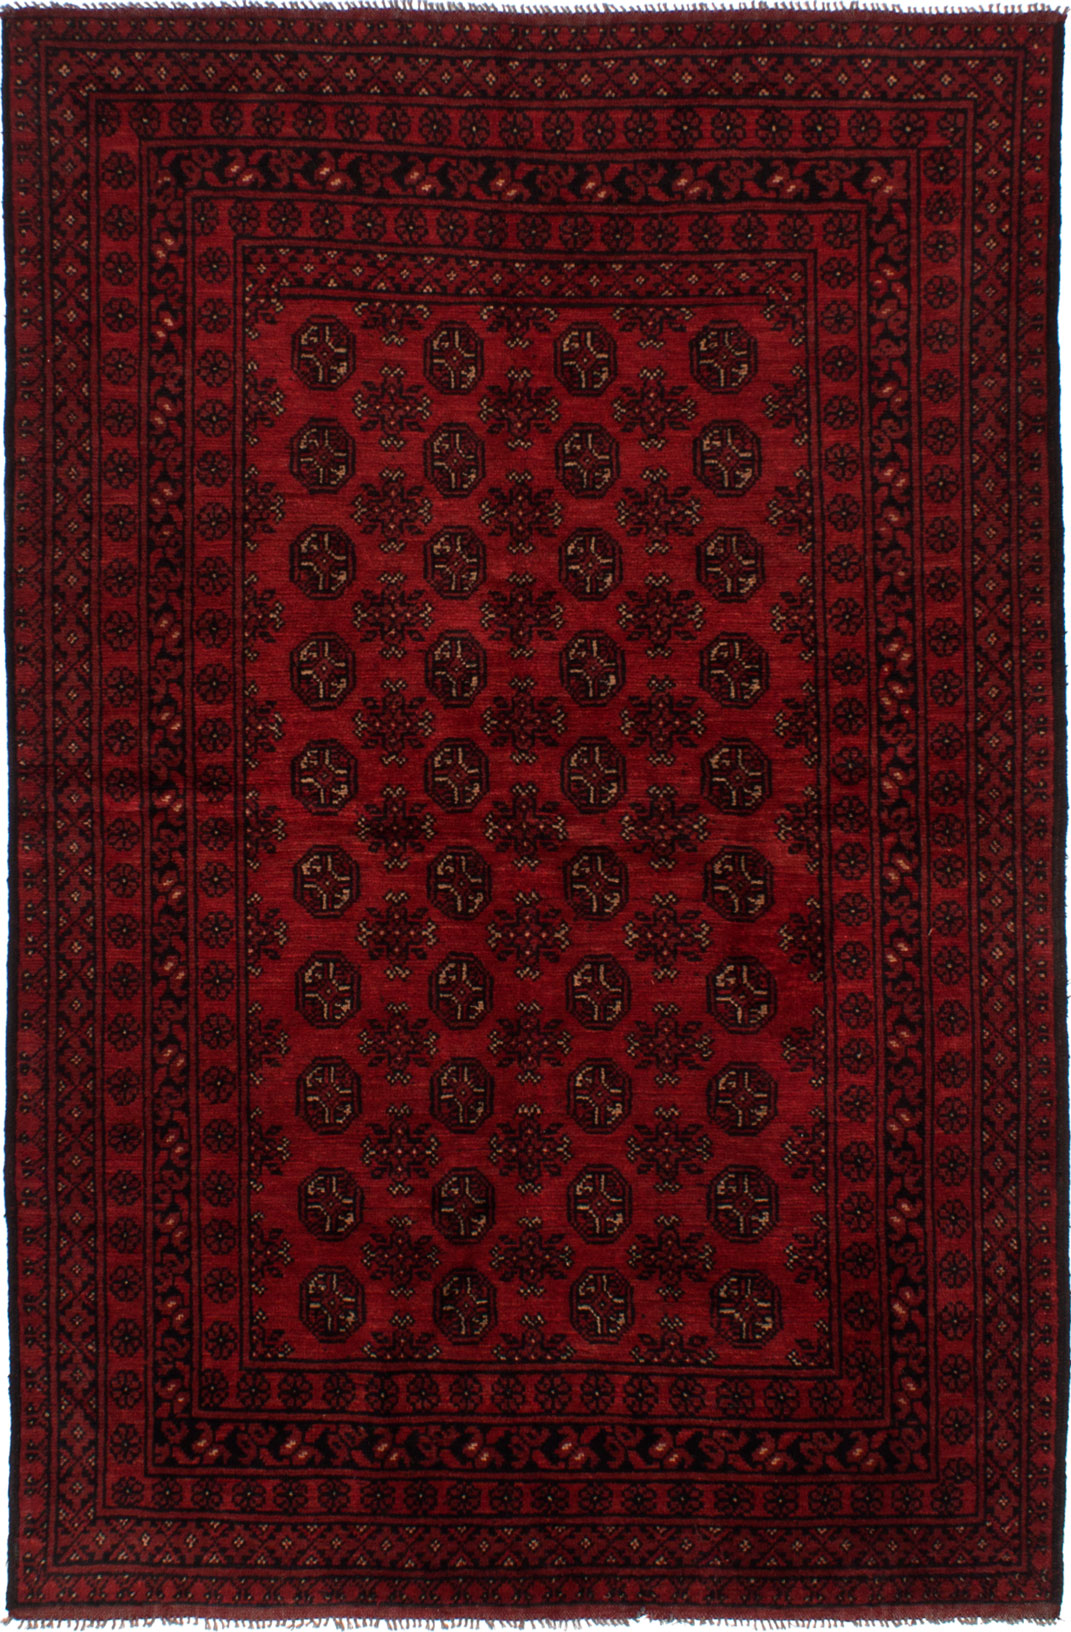 Hand-knotted Khal Mohammadi Dark Red Wool Rug 5'3" x 8'0"  Size: 5'3" x 8'0"  